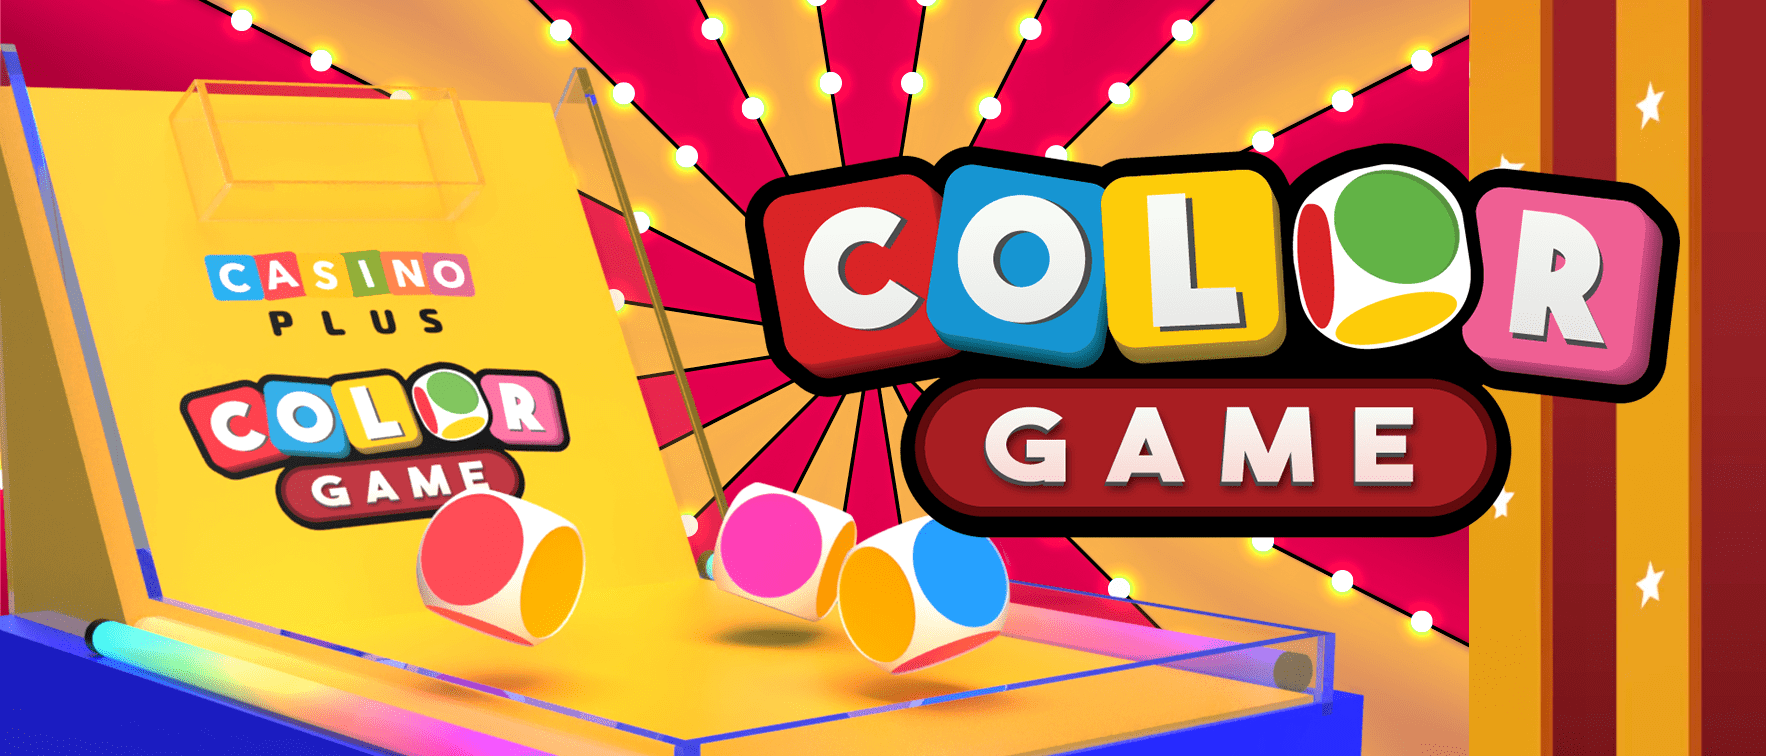 Casino Plus Color Game Betting Odds CG01-24020205 February 02 2024